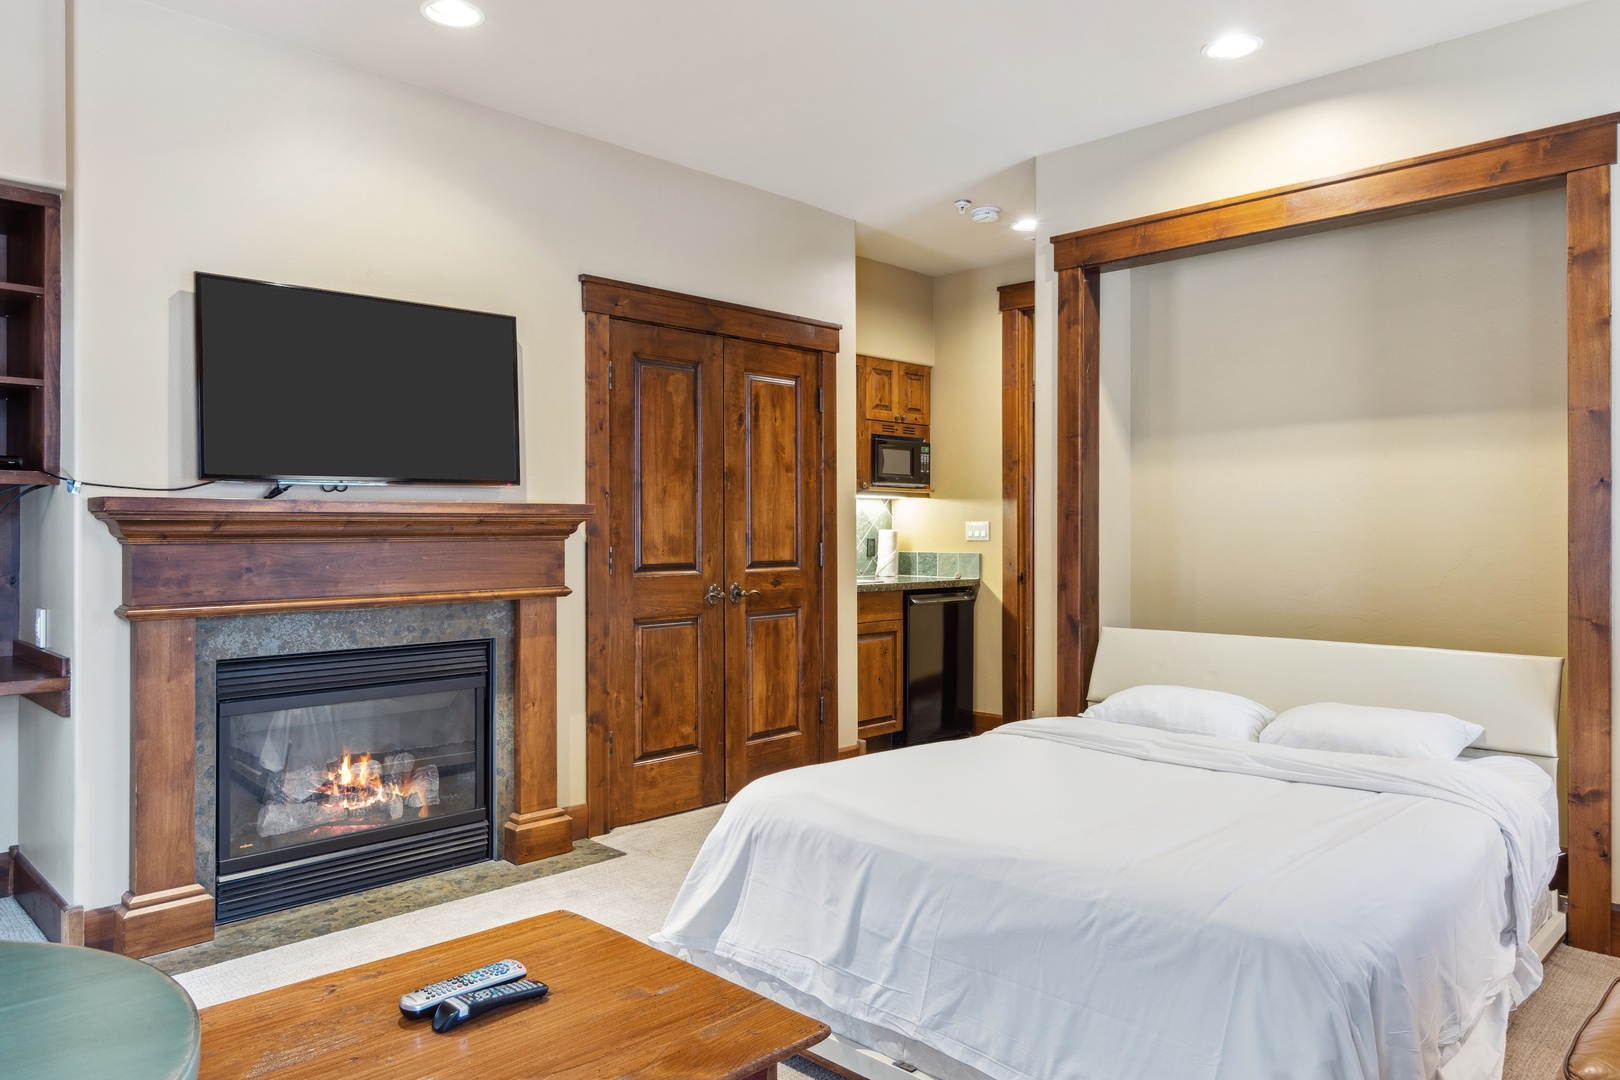 Second Living Area with Murphy Bed